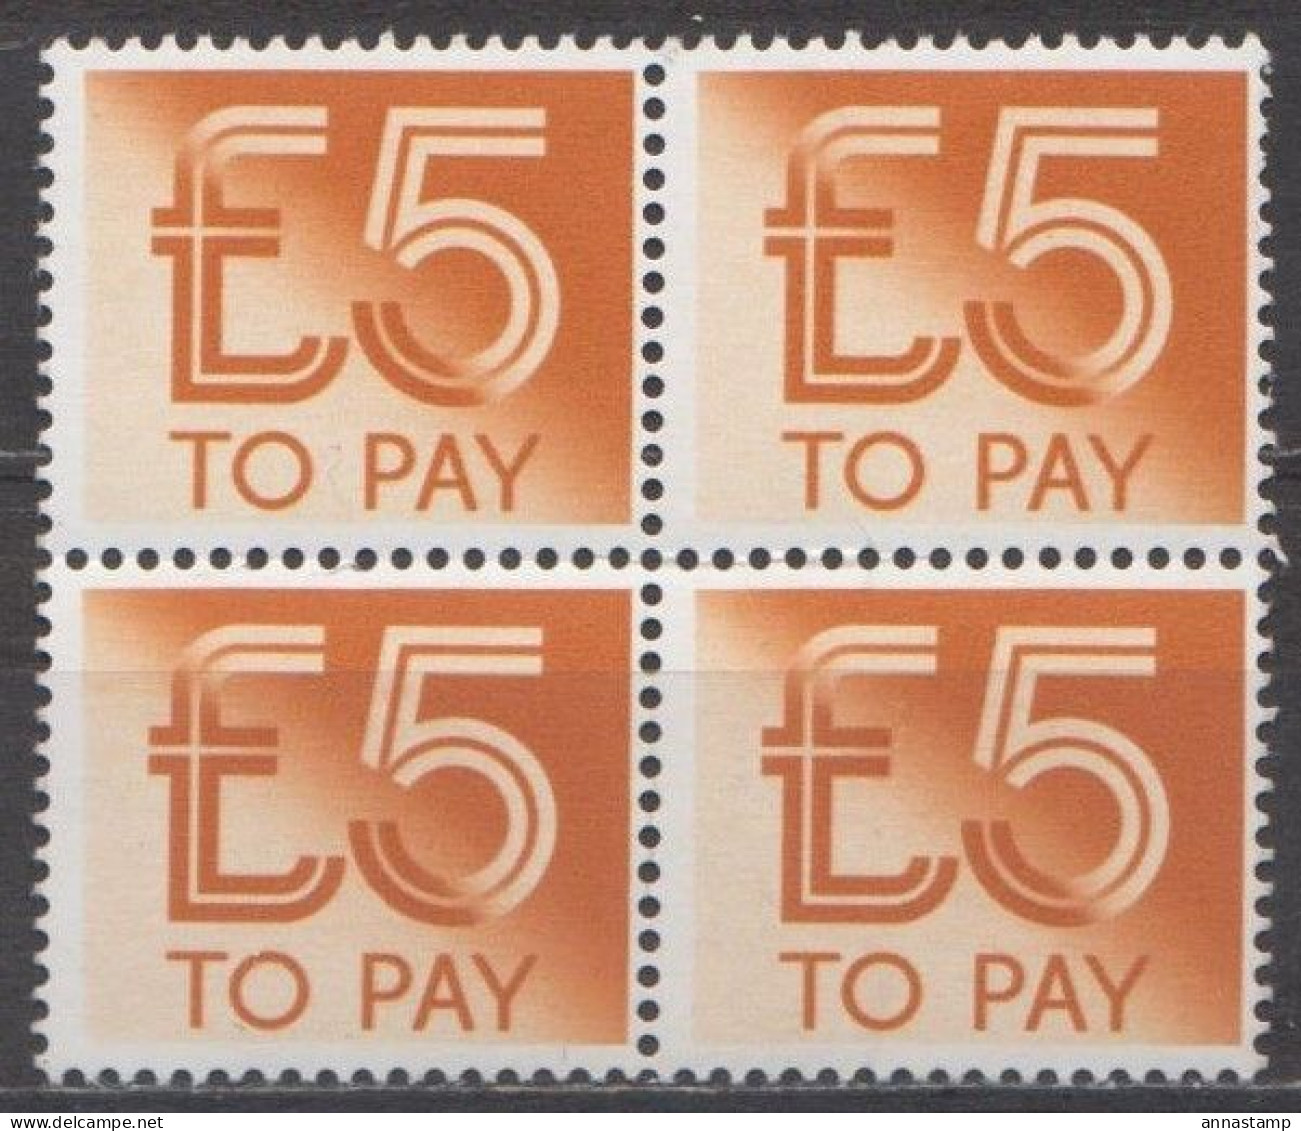 Great Britain MNH Stamp In A Block Of 4 Stamps - Tasse